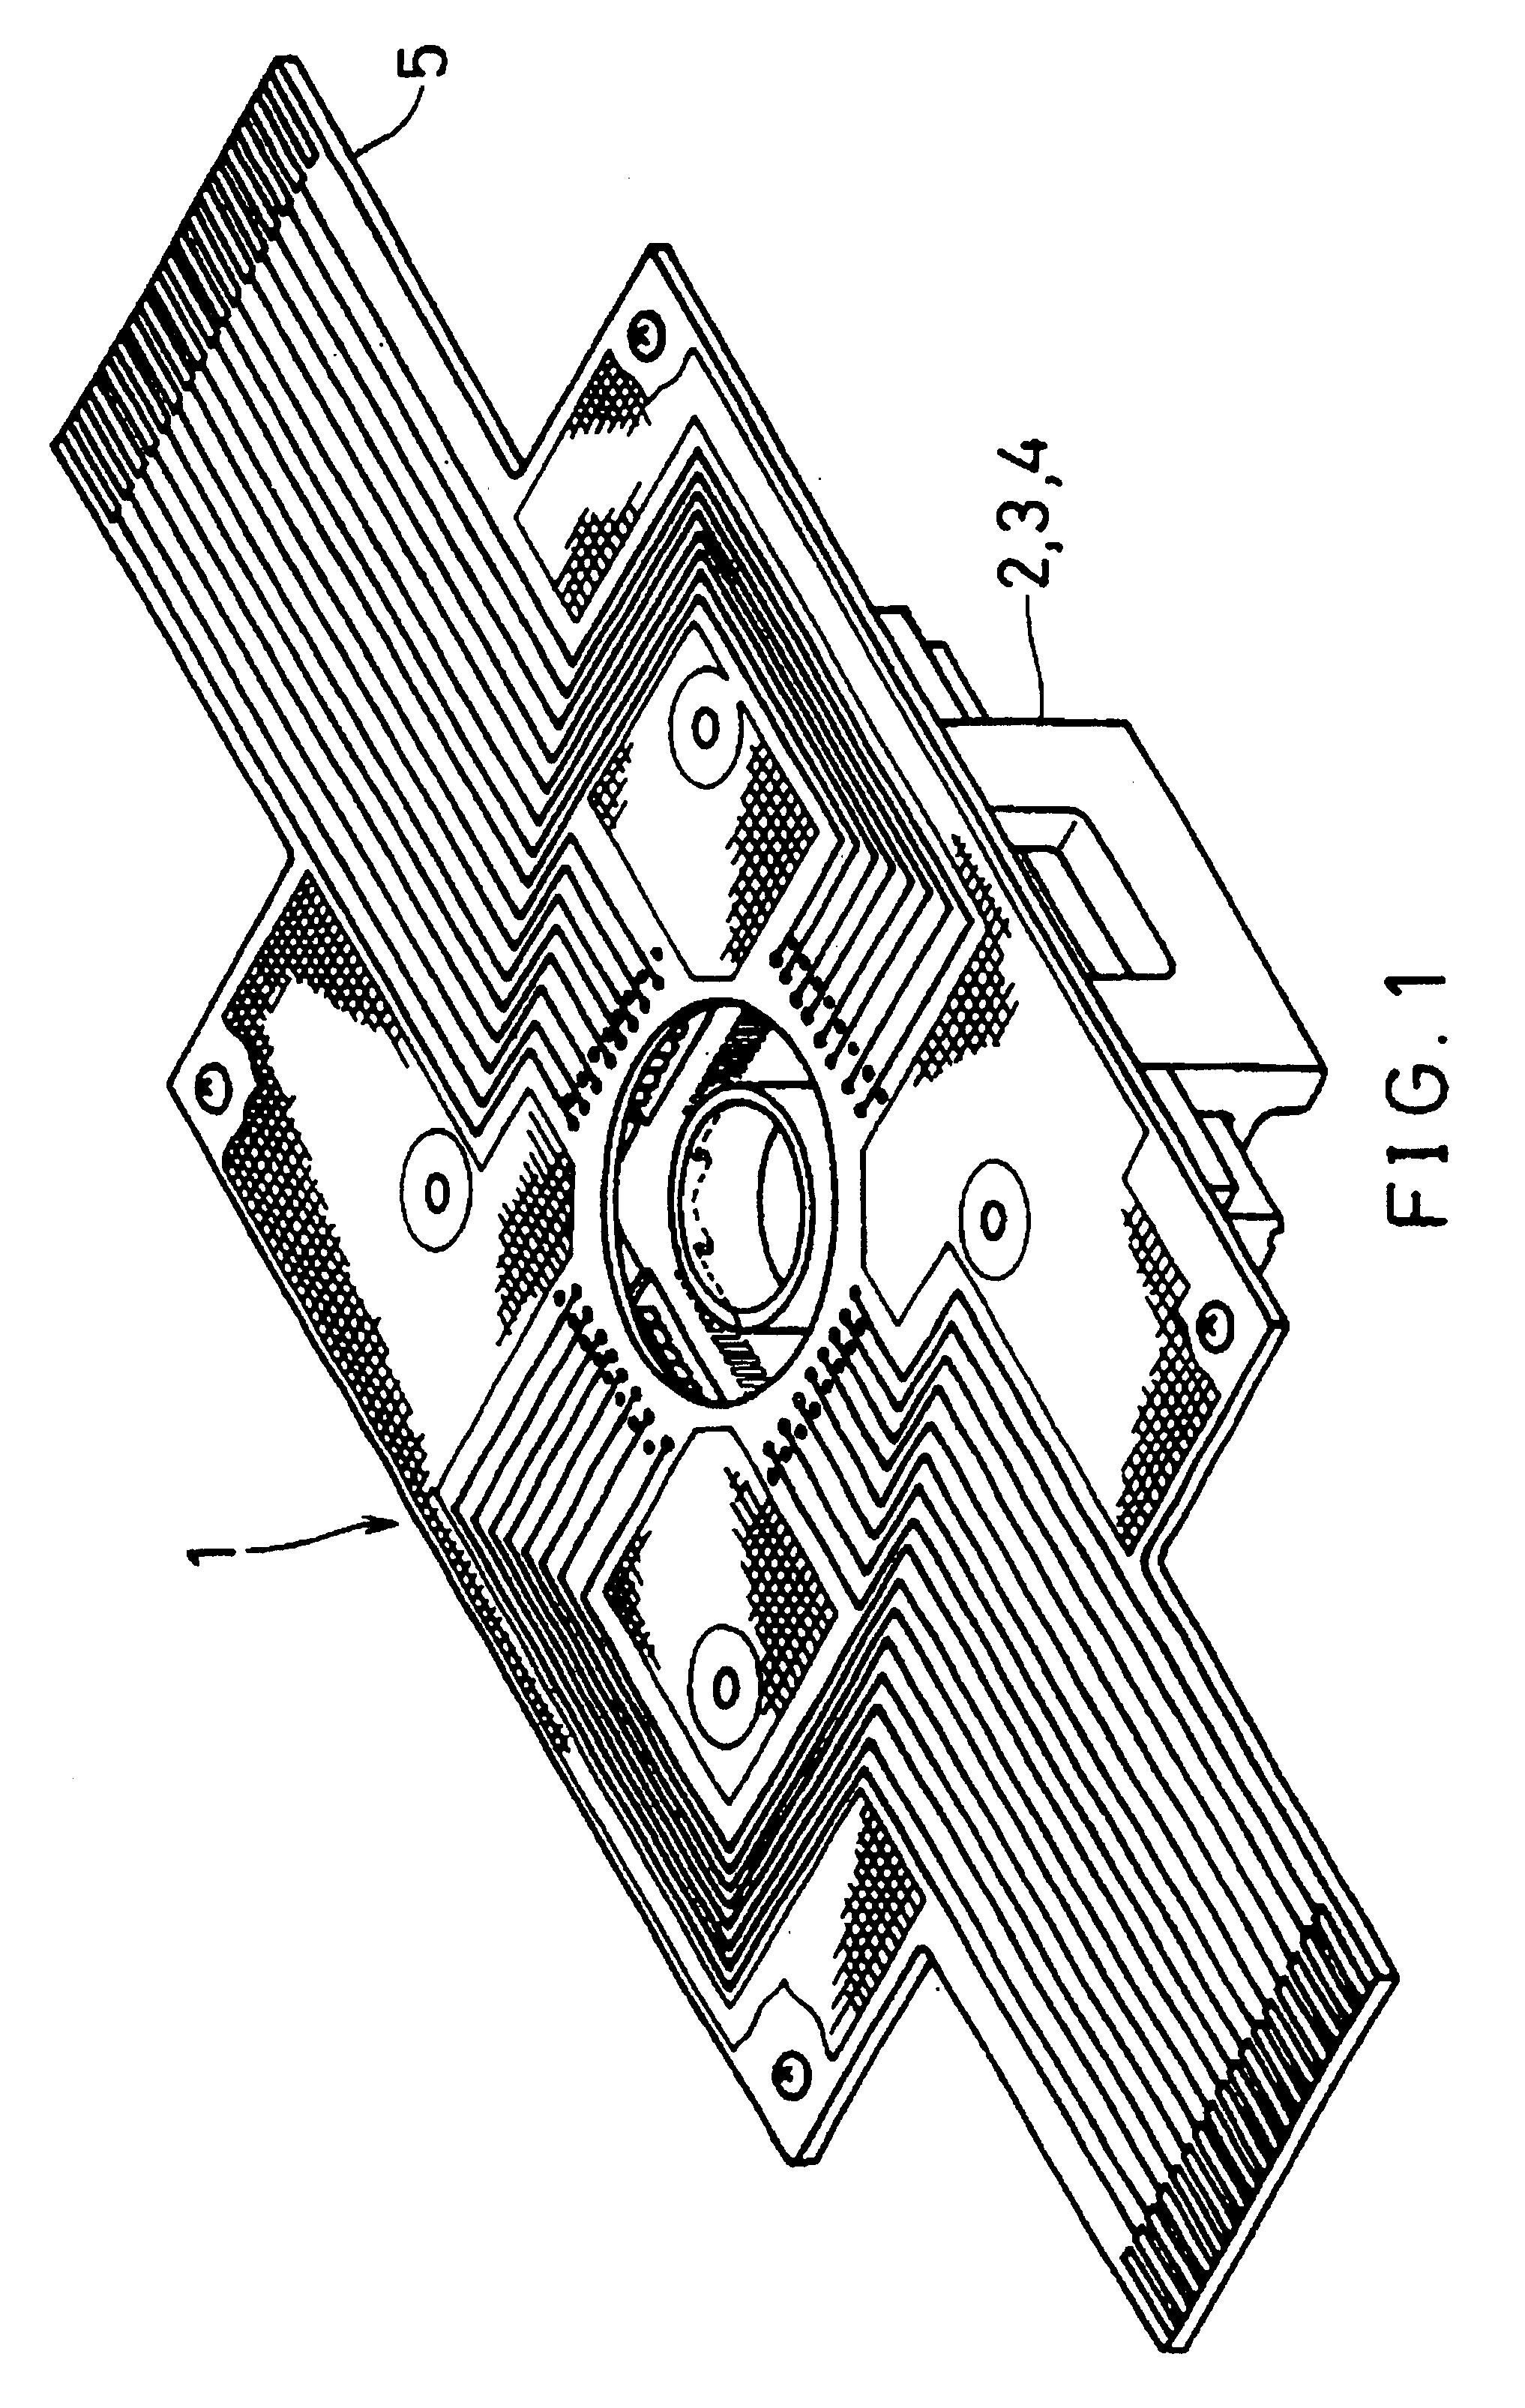 Cell potential measurement apparatus having a plurality of microelectrodes